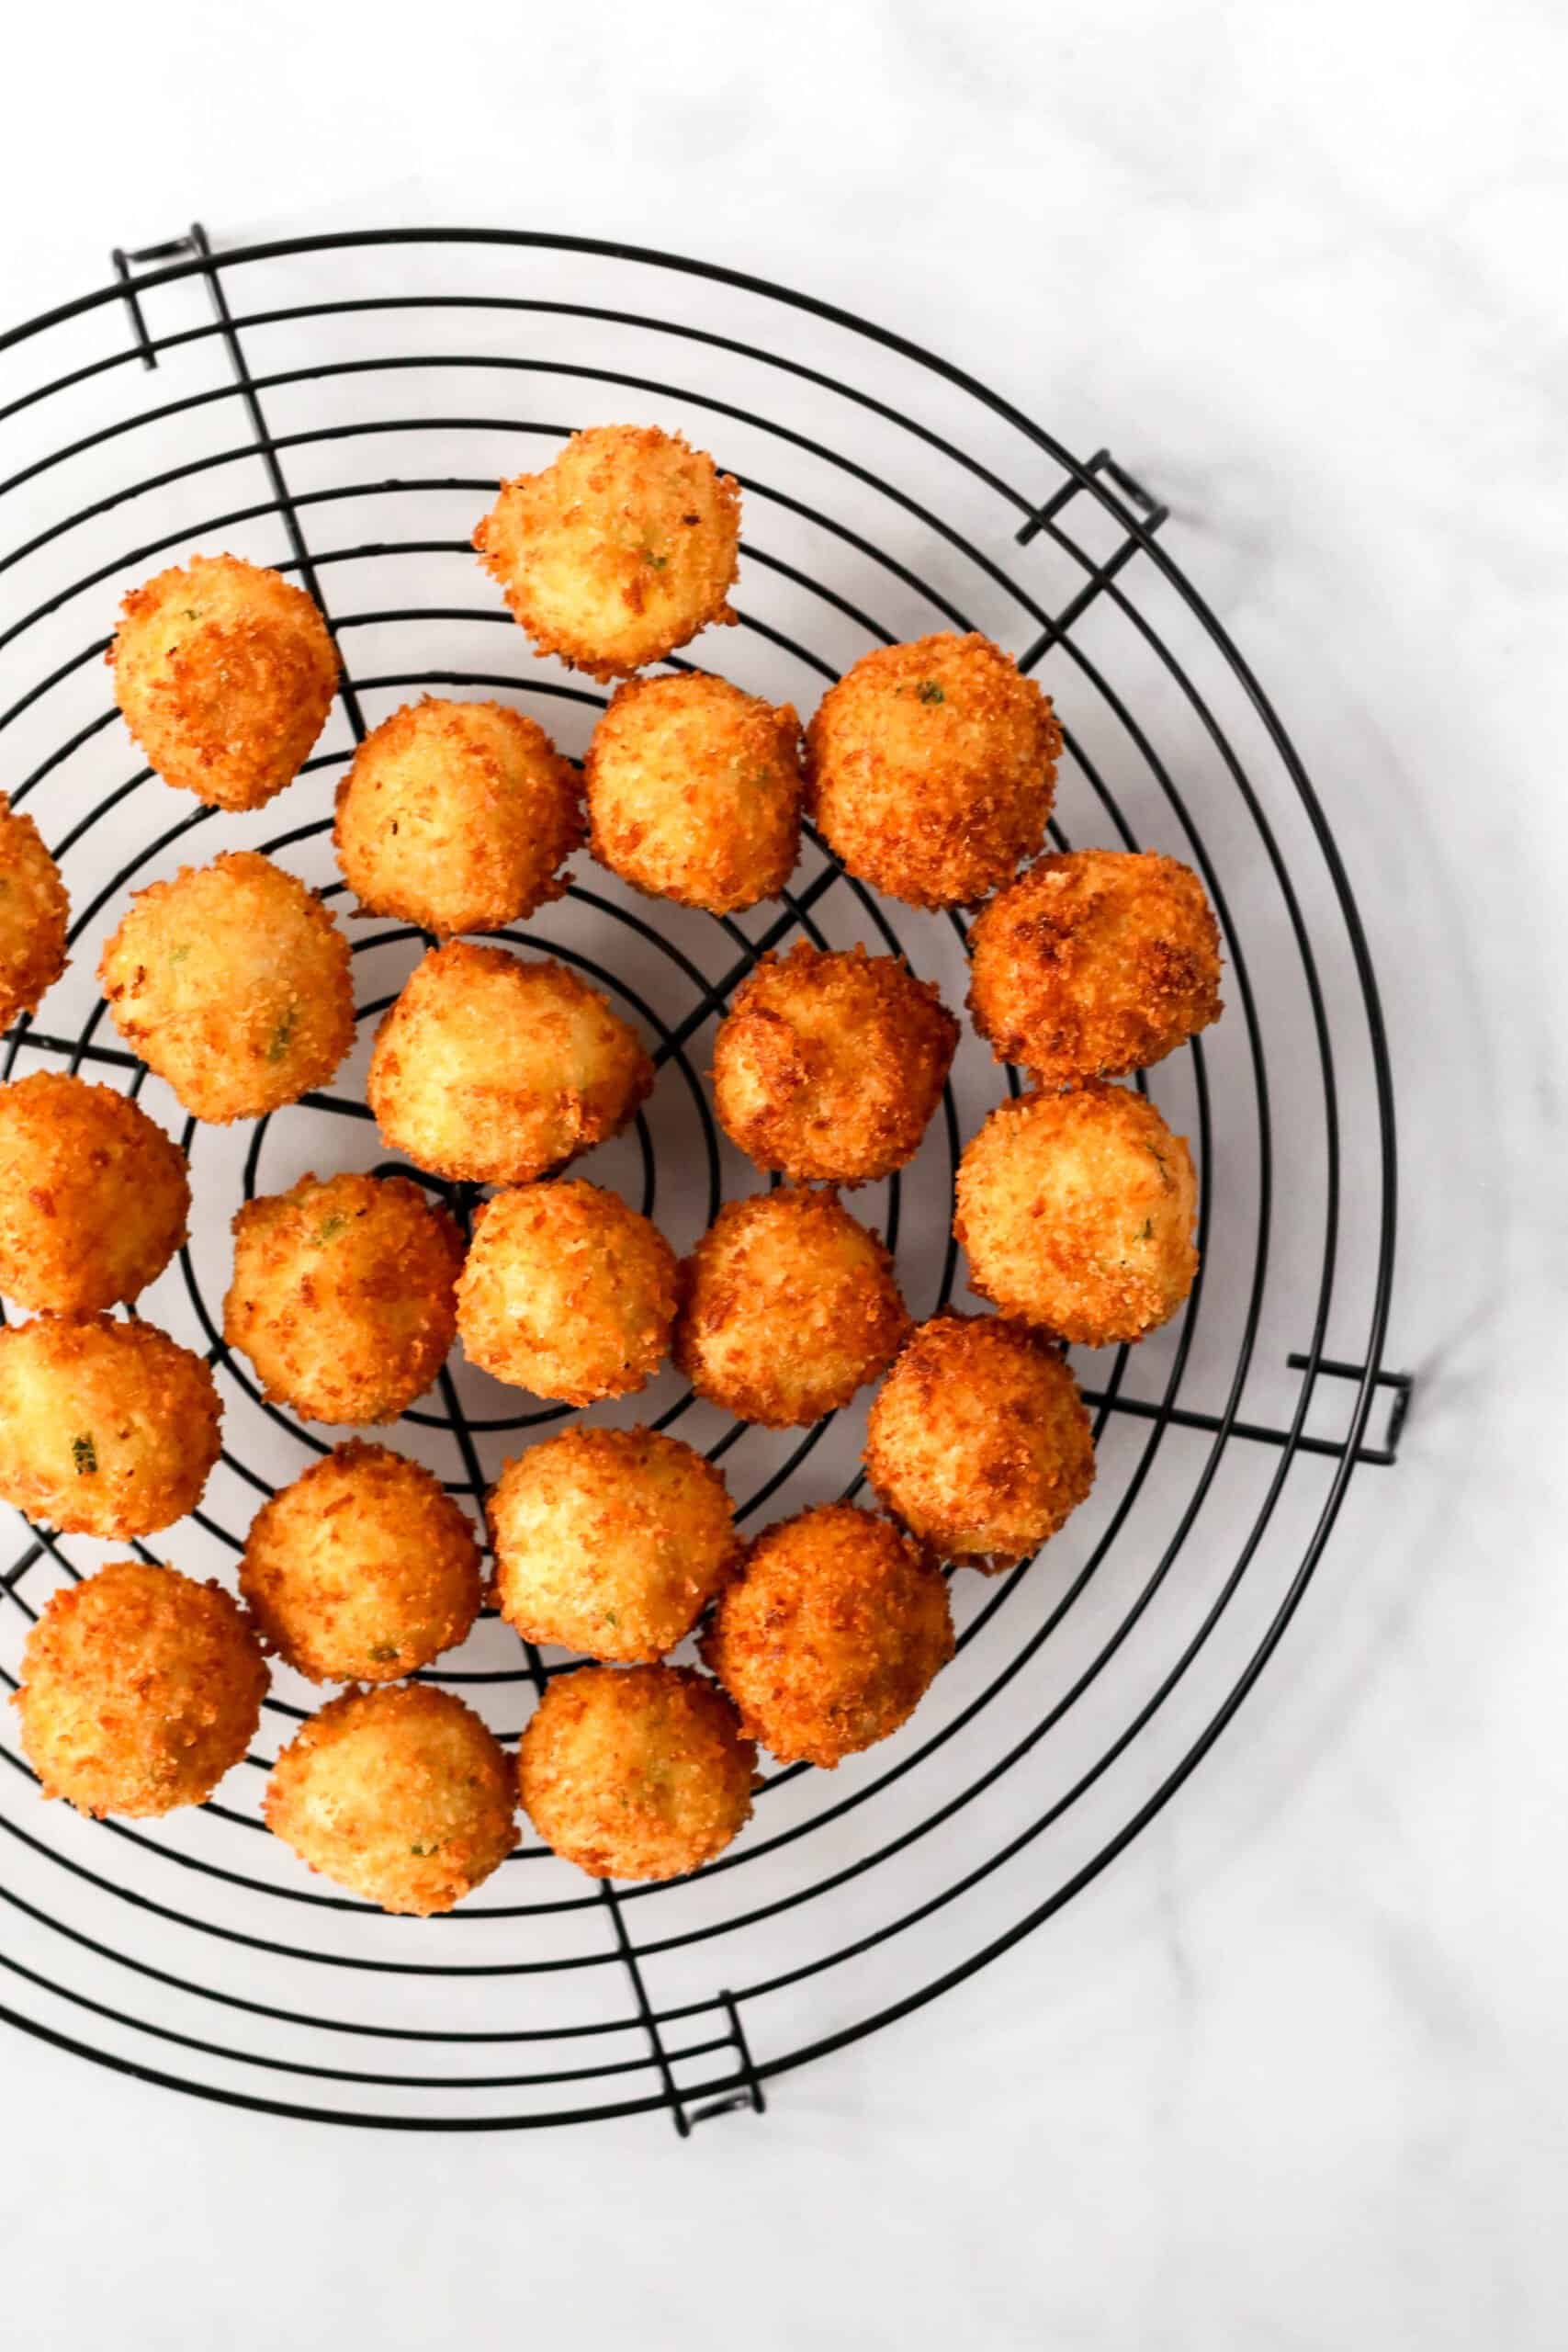 Fried cheesy potato croquettes on cooling rack.